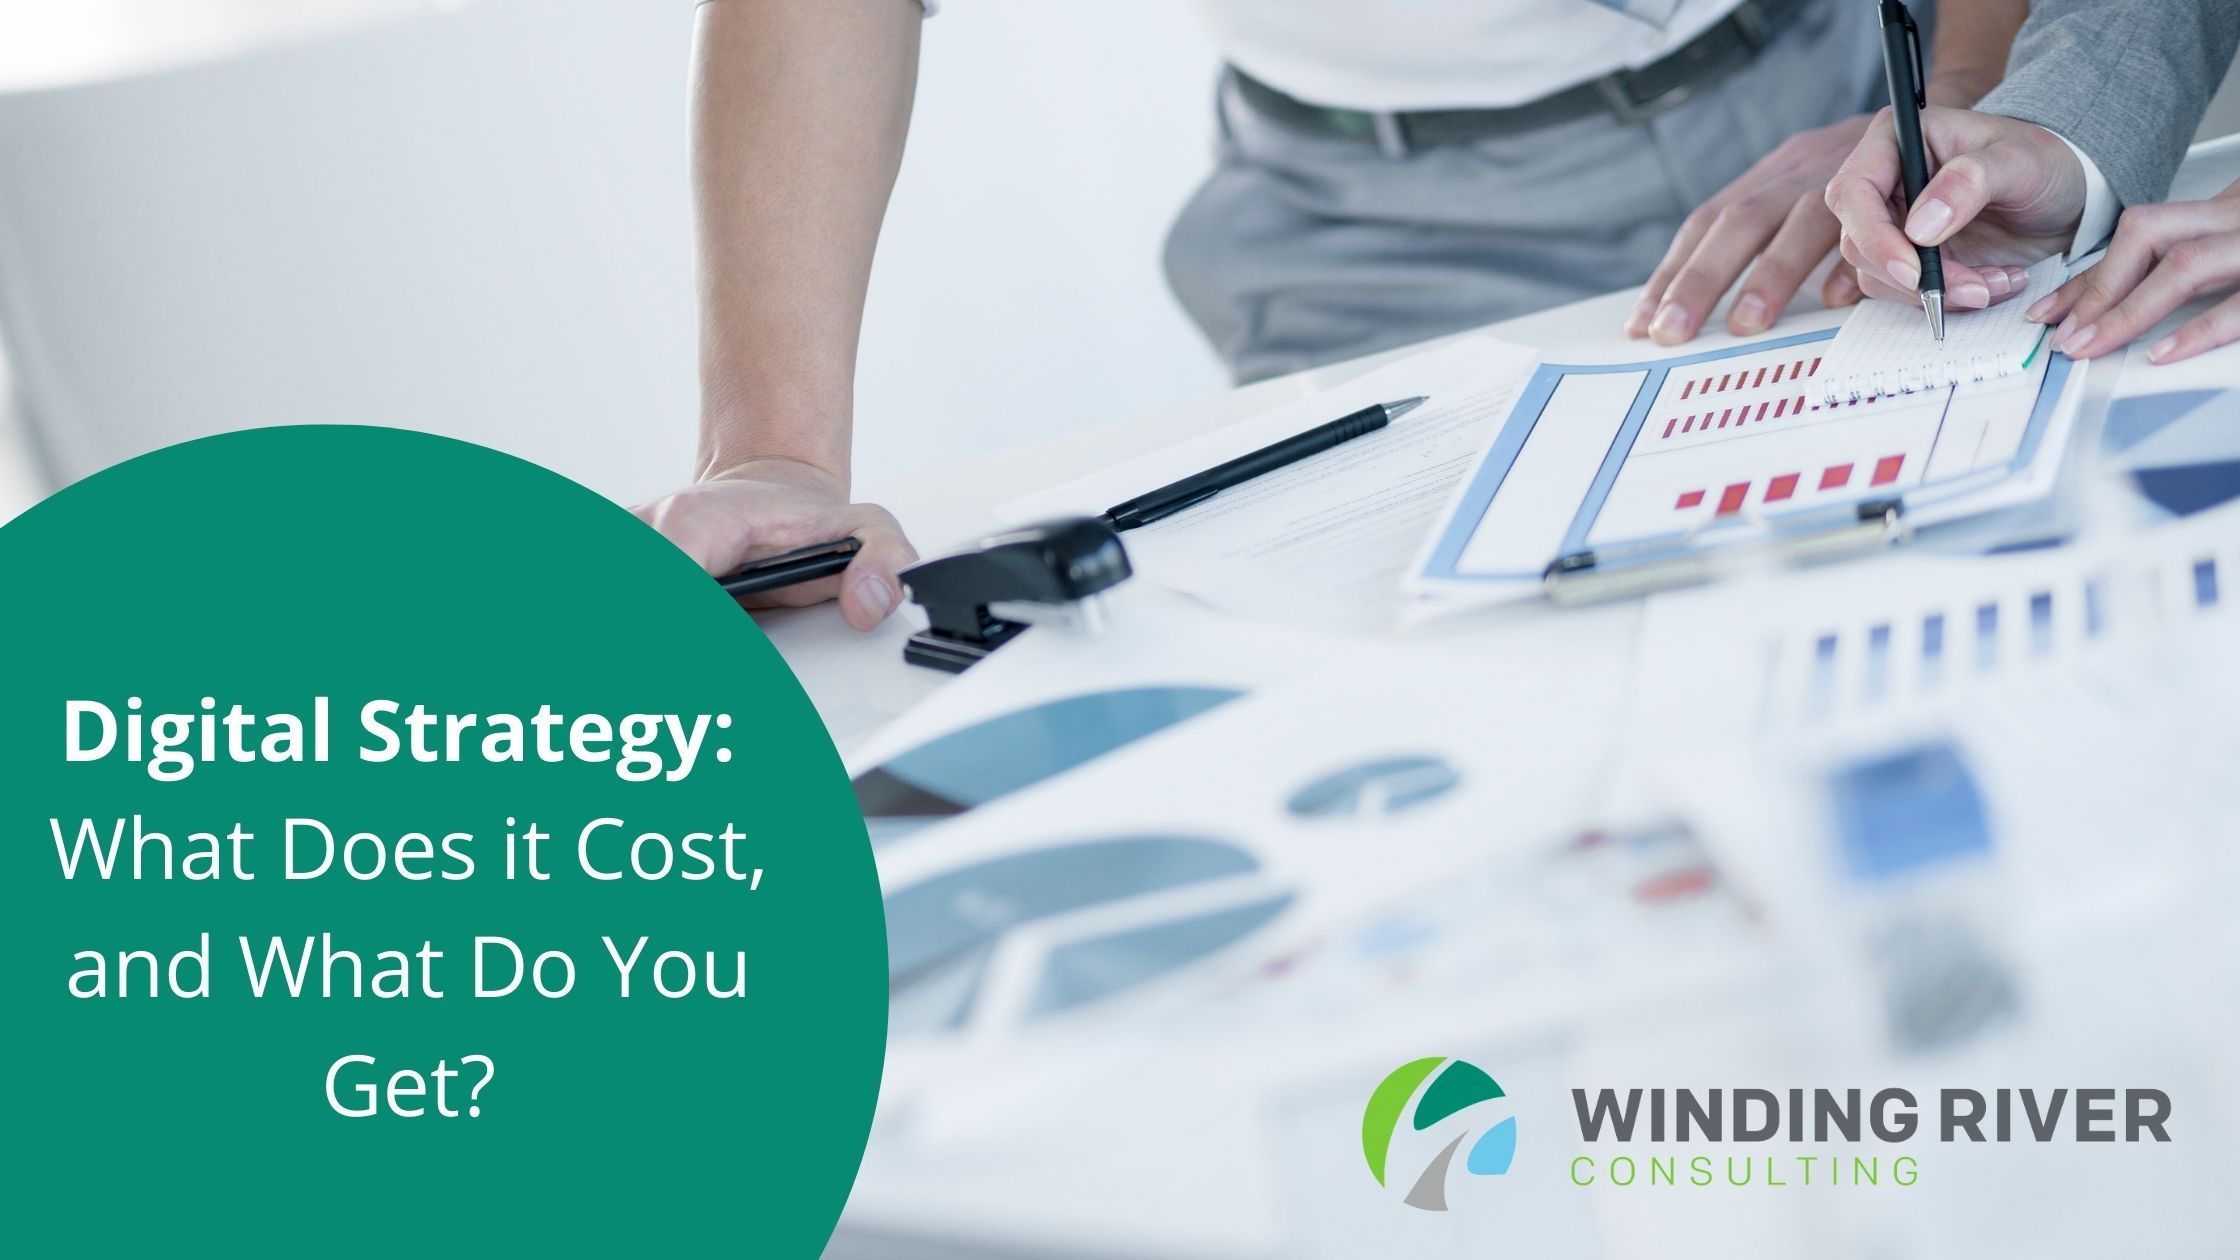 Digital Strategy: What Does it Cost, and What Do You Get?